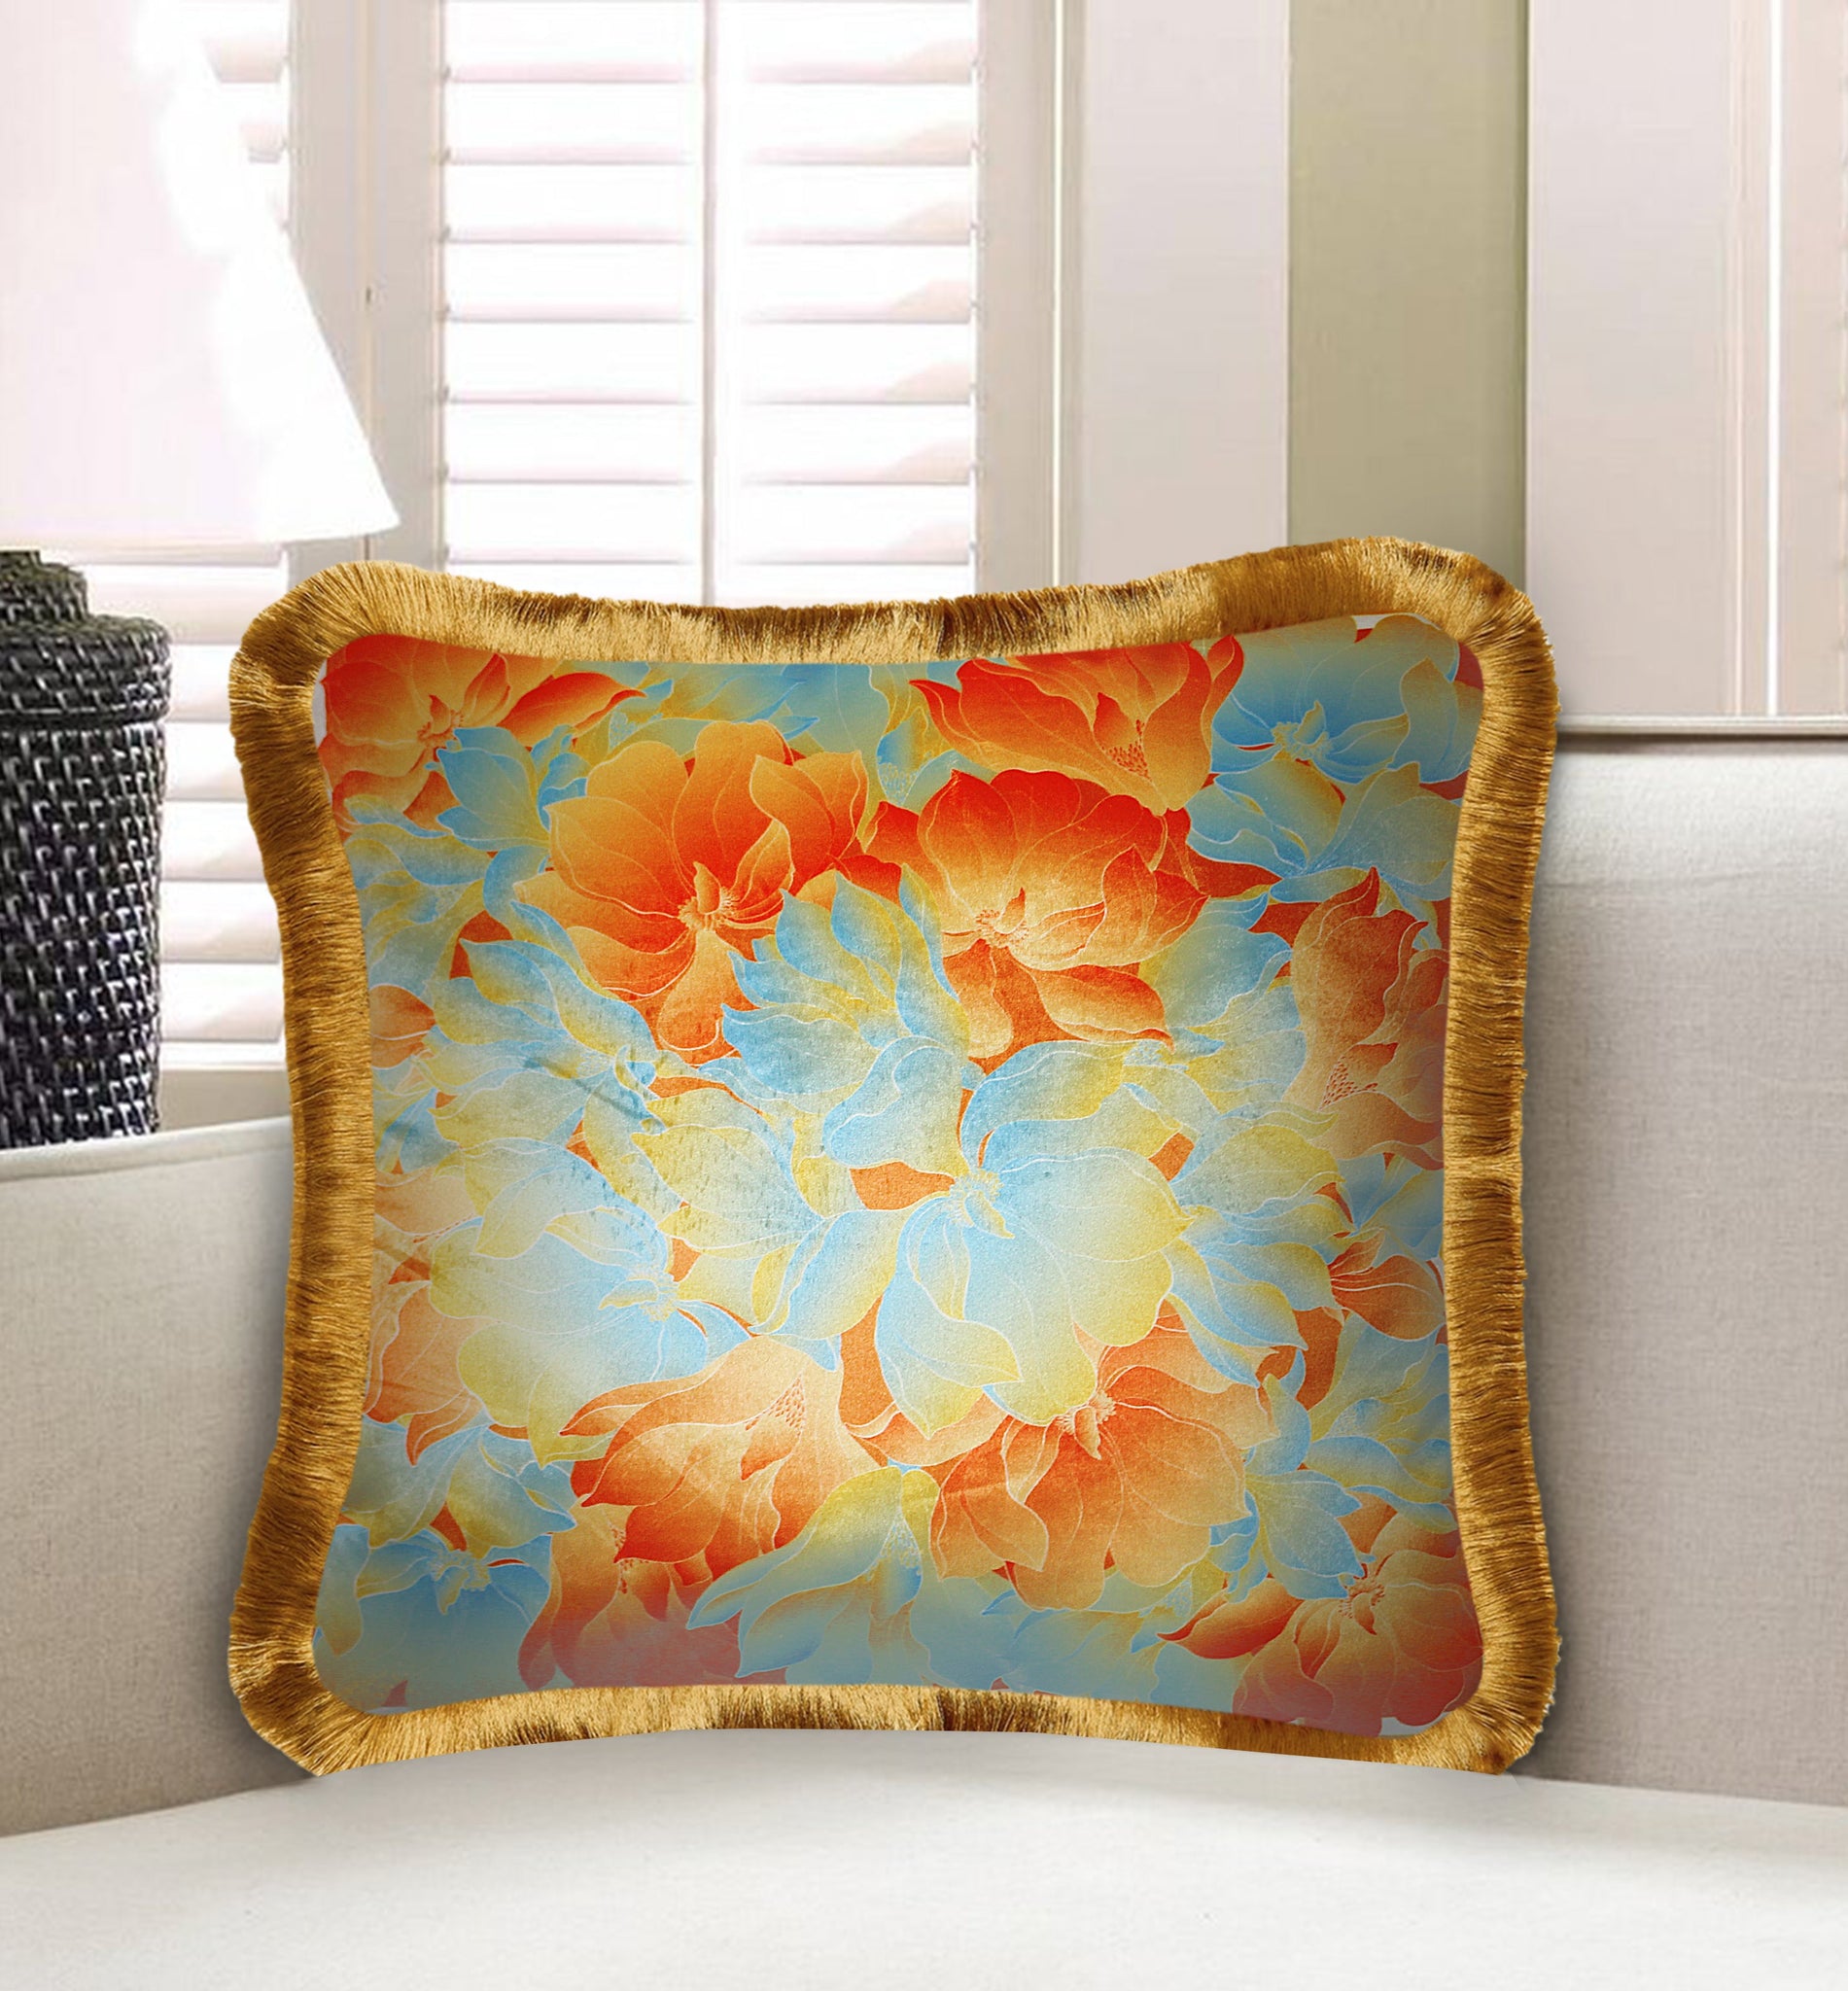 Velvet Cushion Cover Abstract Floral Decorative Pillow Cover Modern Home Decor Throw Pillow for Sofa Chair Couch Bedroom 45x45 cm 18x18 In